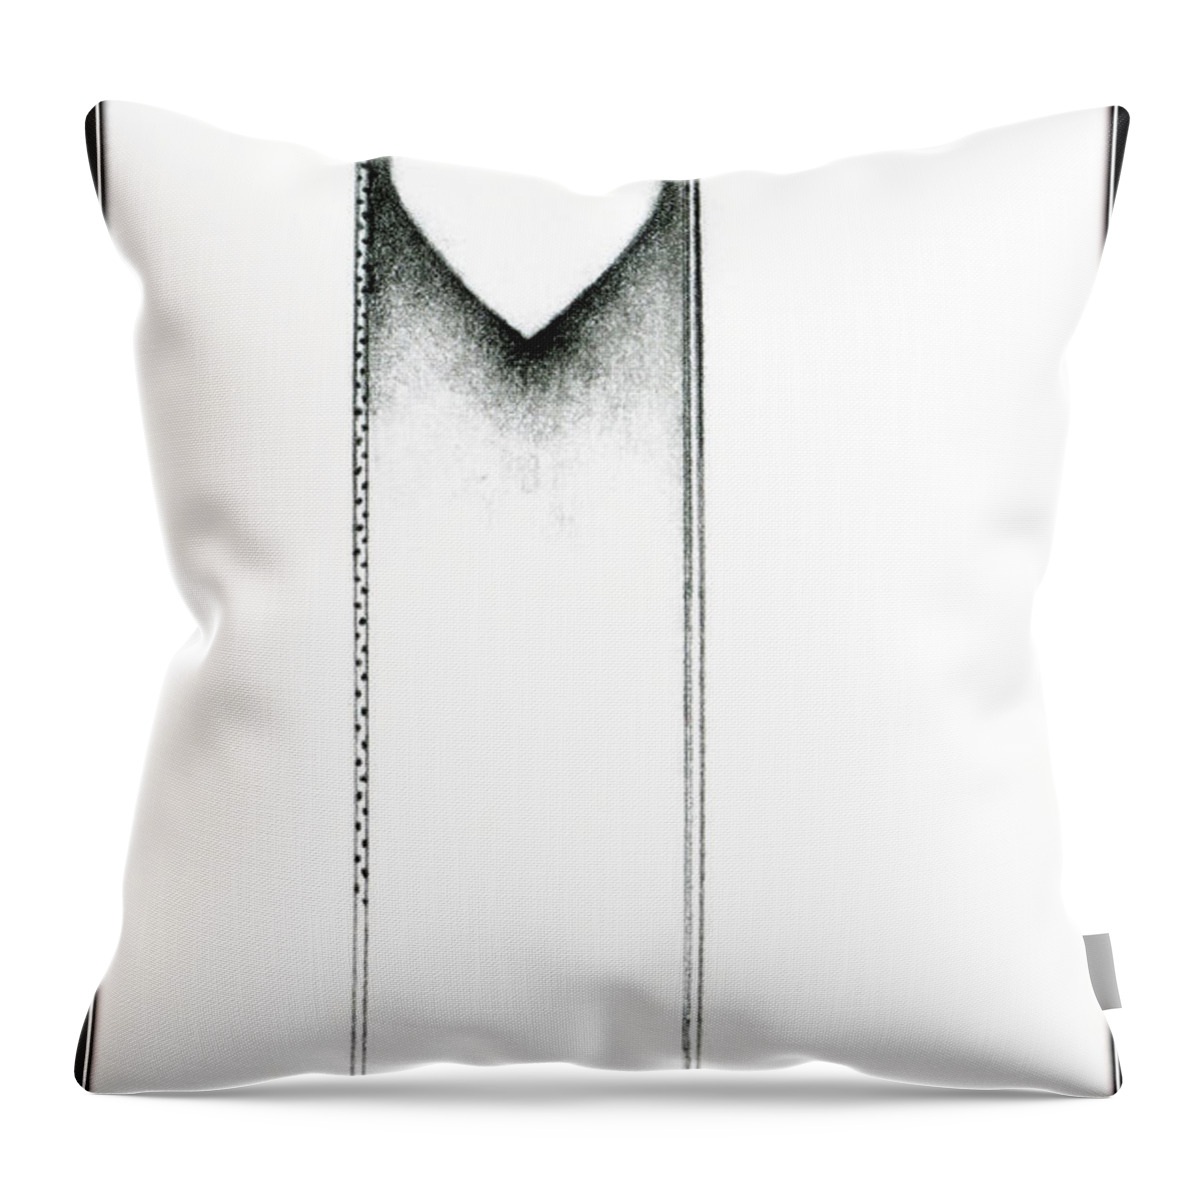  Throw Pillow featuring the drawing Ascending Heart by James Lanigan Thompson MFA